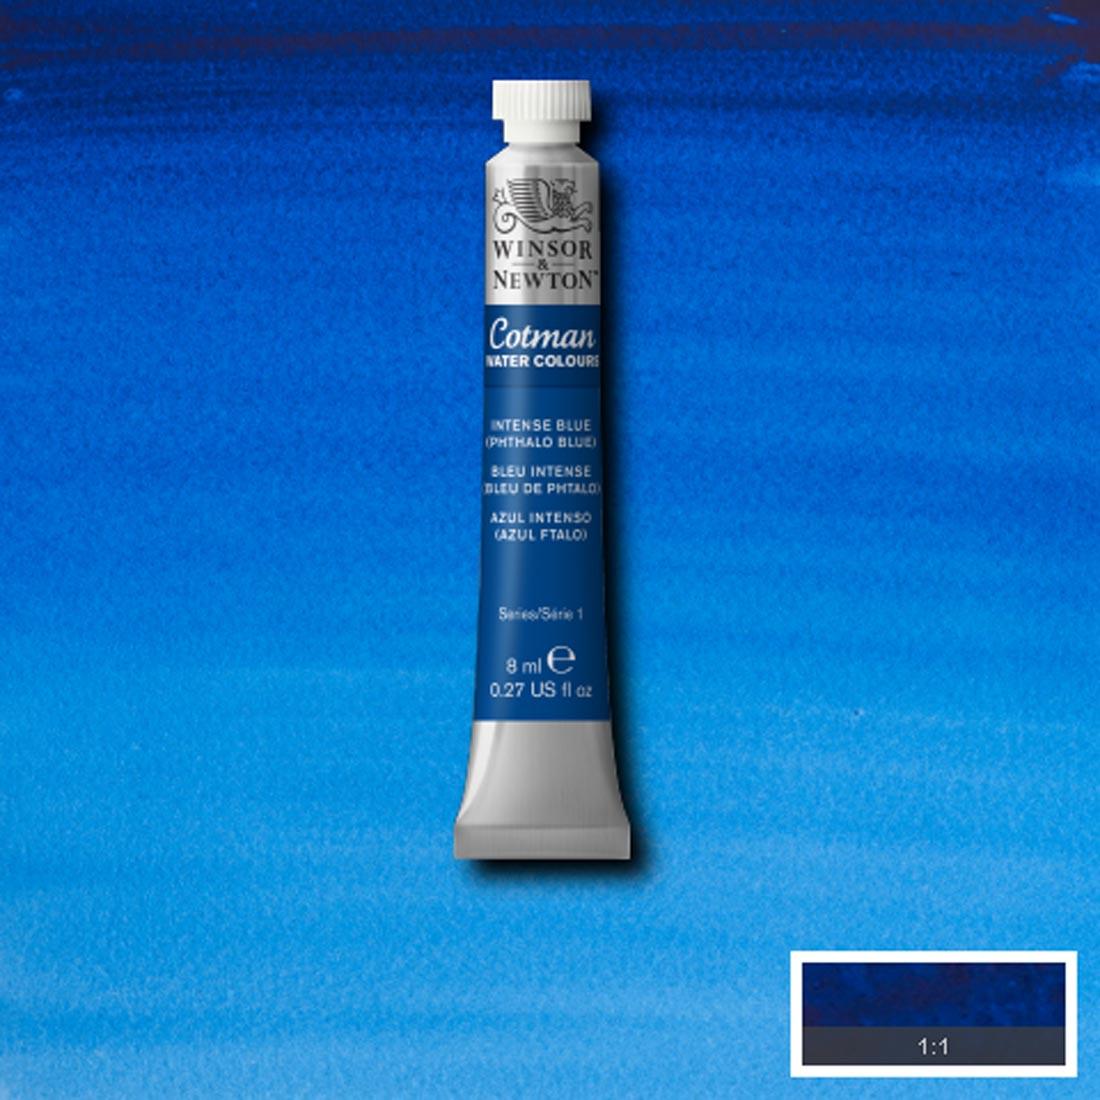 Tube of Intense Blue (Phthalo Blue) Winsor & Newton Cotman Water Colour with a paint swatch for the background